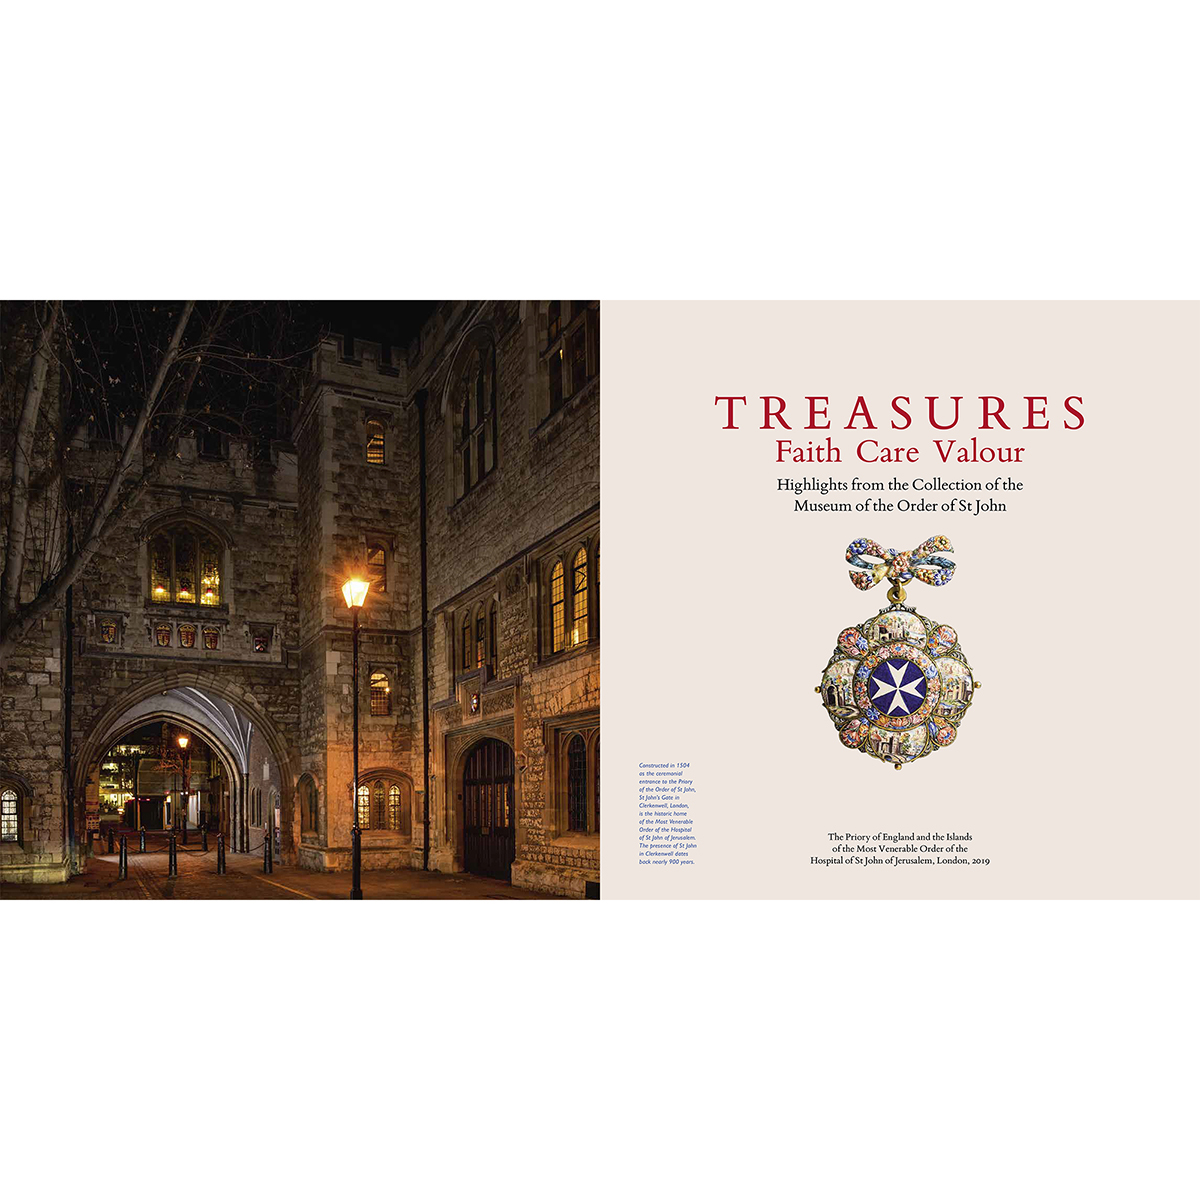 TREASURES - Highlights from the Collection of the Museum of the Order of St John